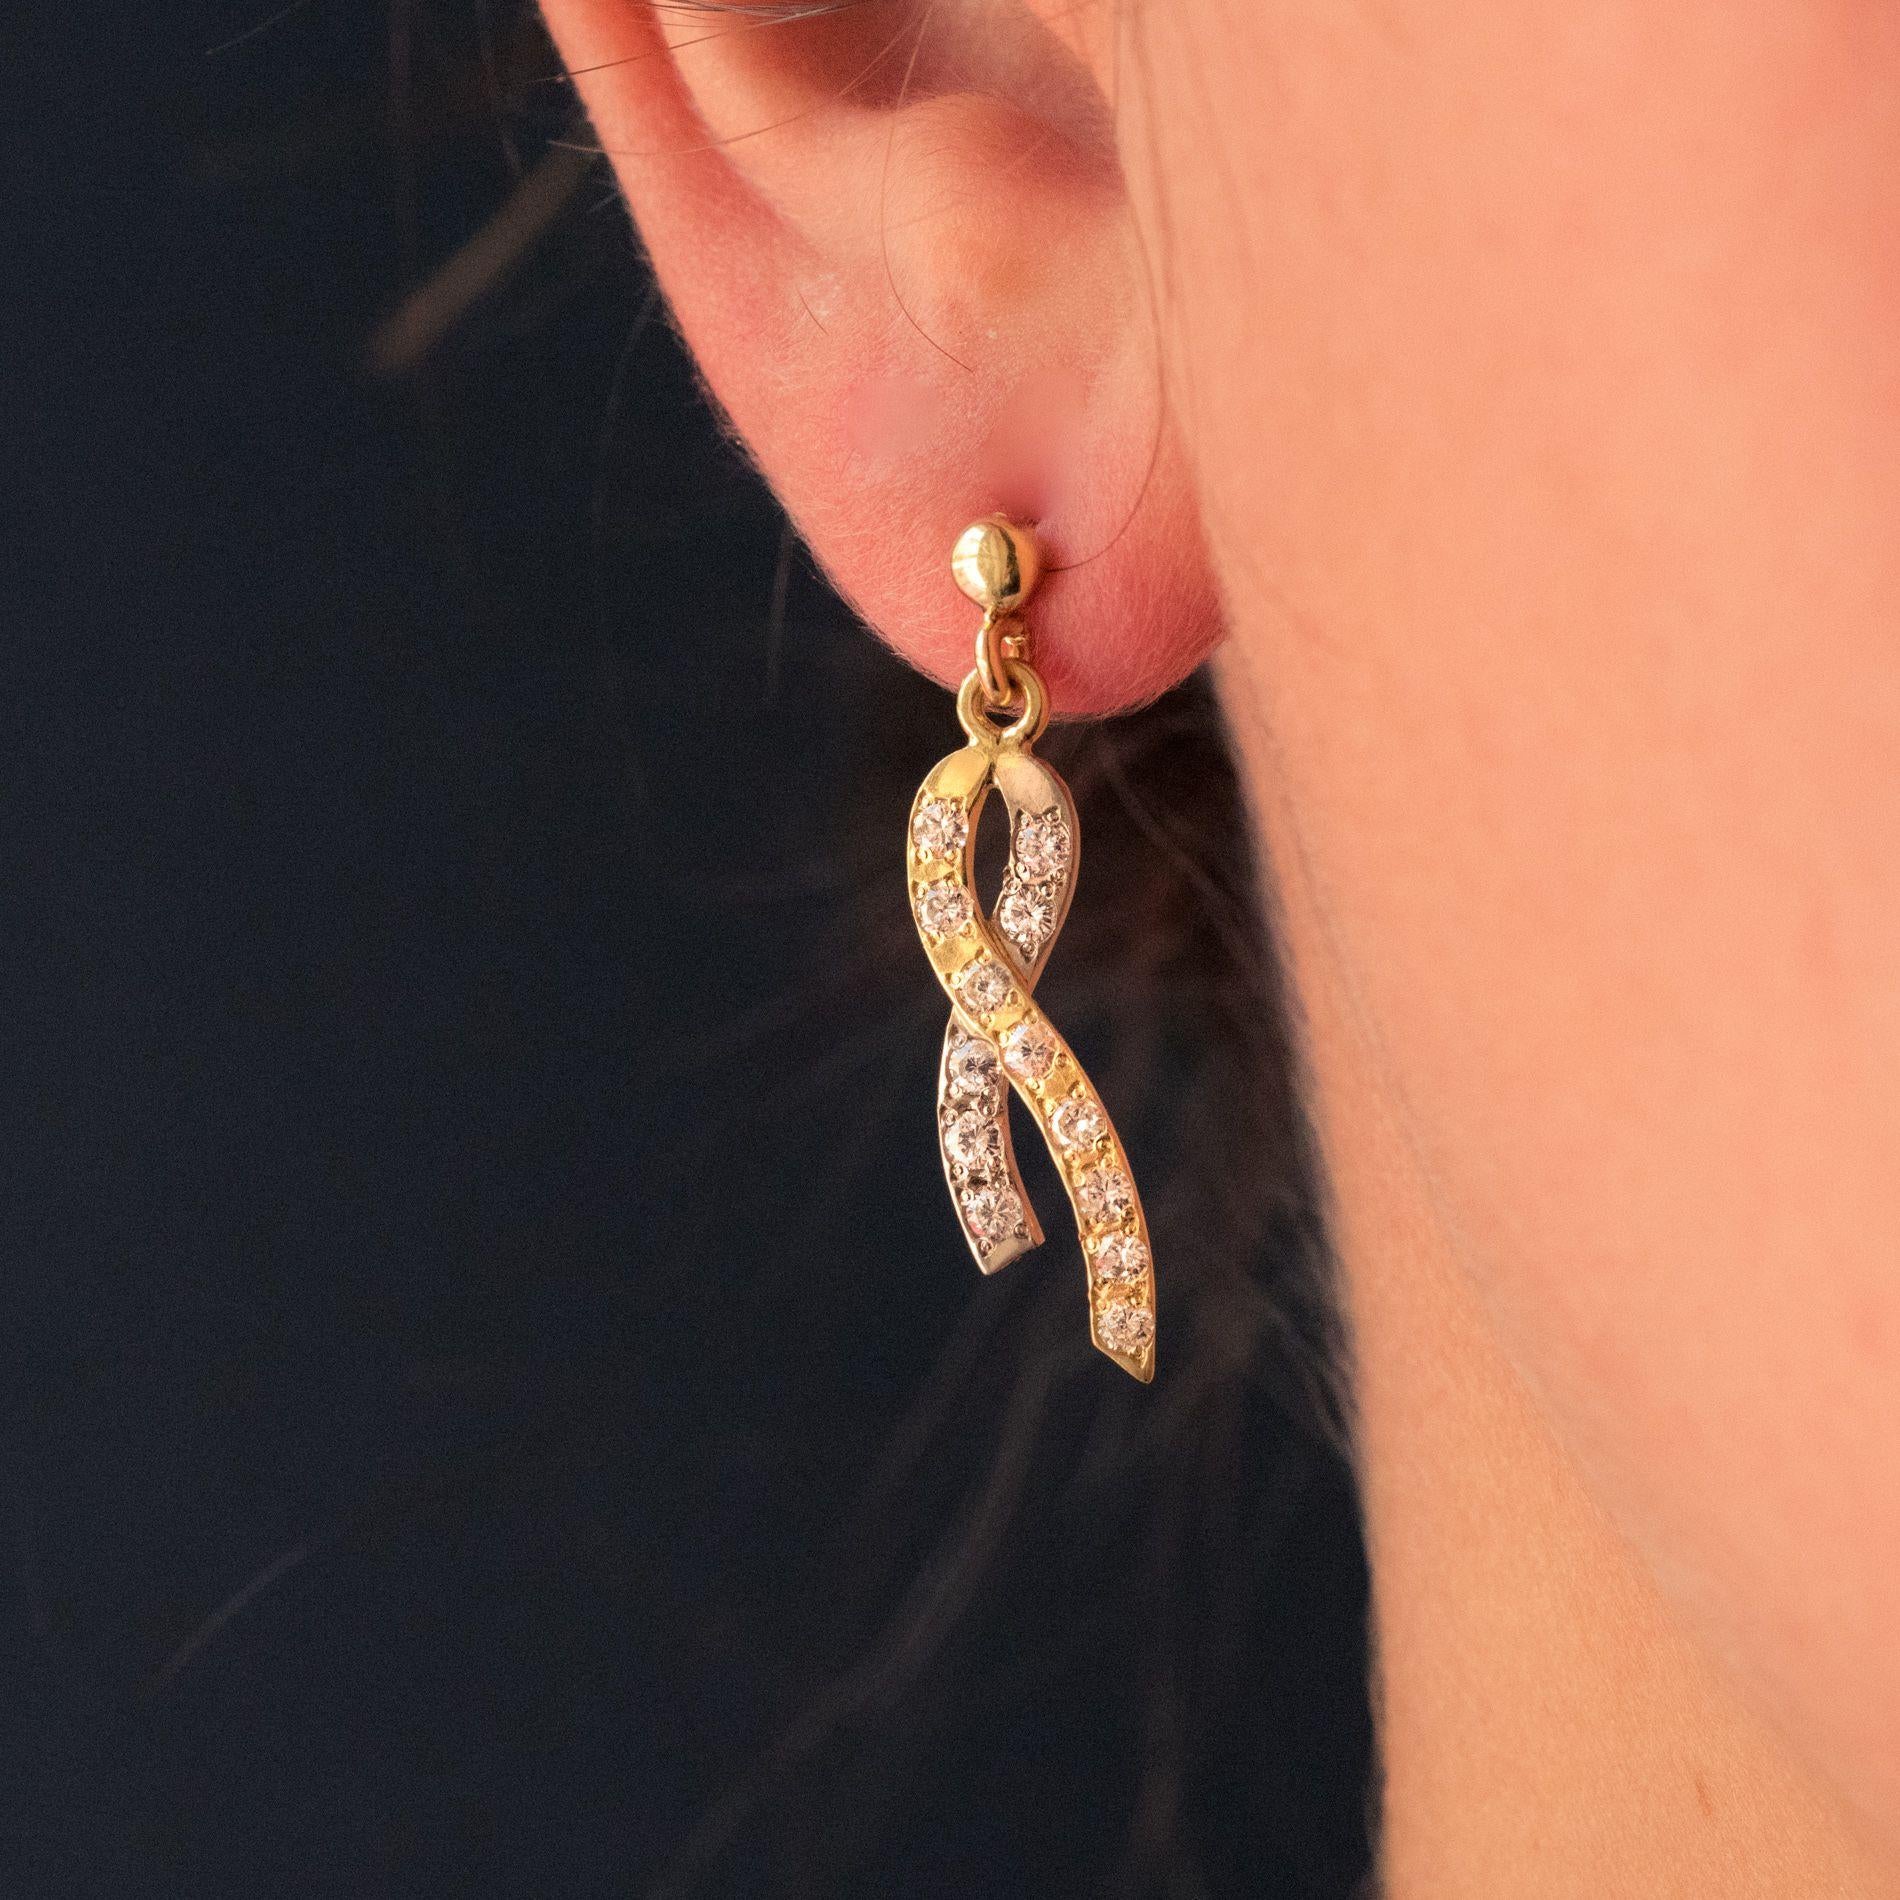 For pierced ears.
Earrings in 18 karat yellow and white gold.
In the shape of a ribbon with one side in yellow gold and the other in white gold, each earring is set with 13 brilliant- cut diamonds on the front. This pattern is supported by a flat